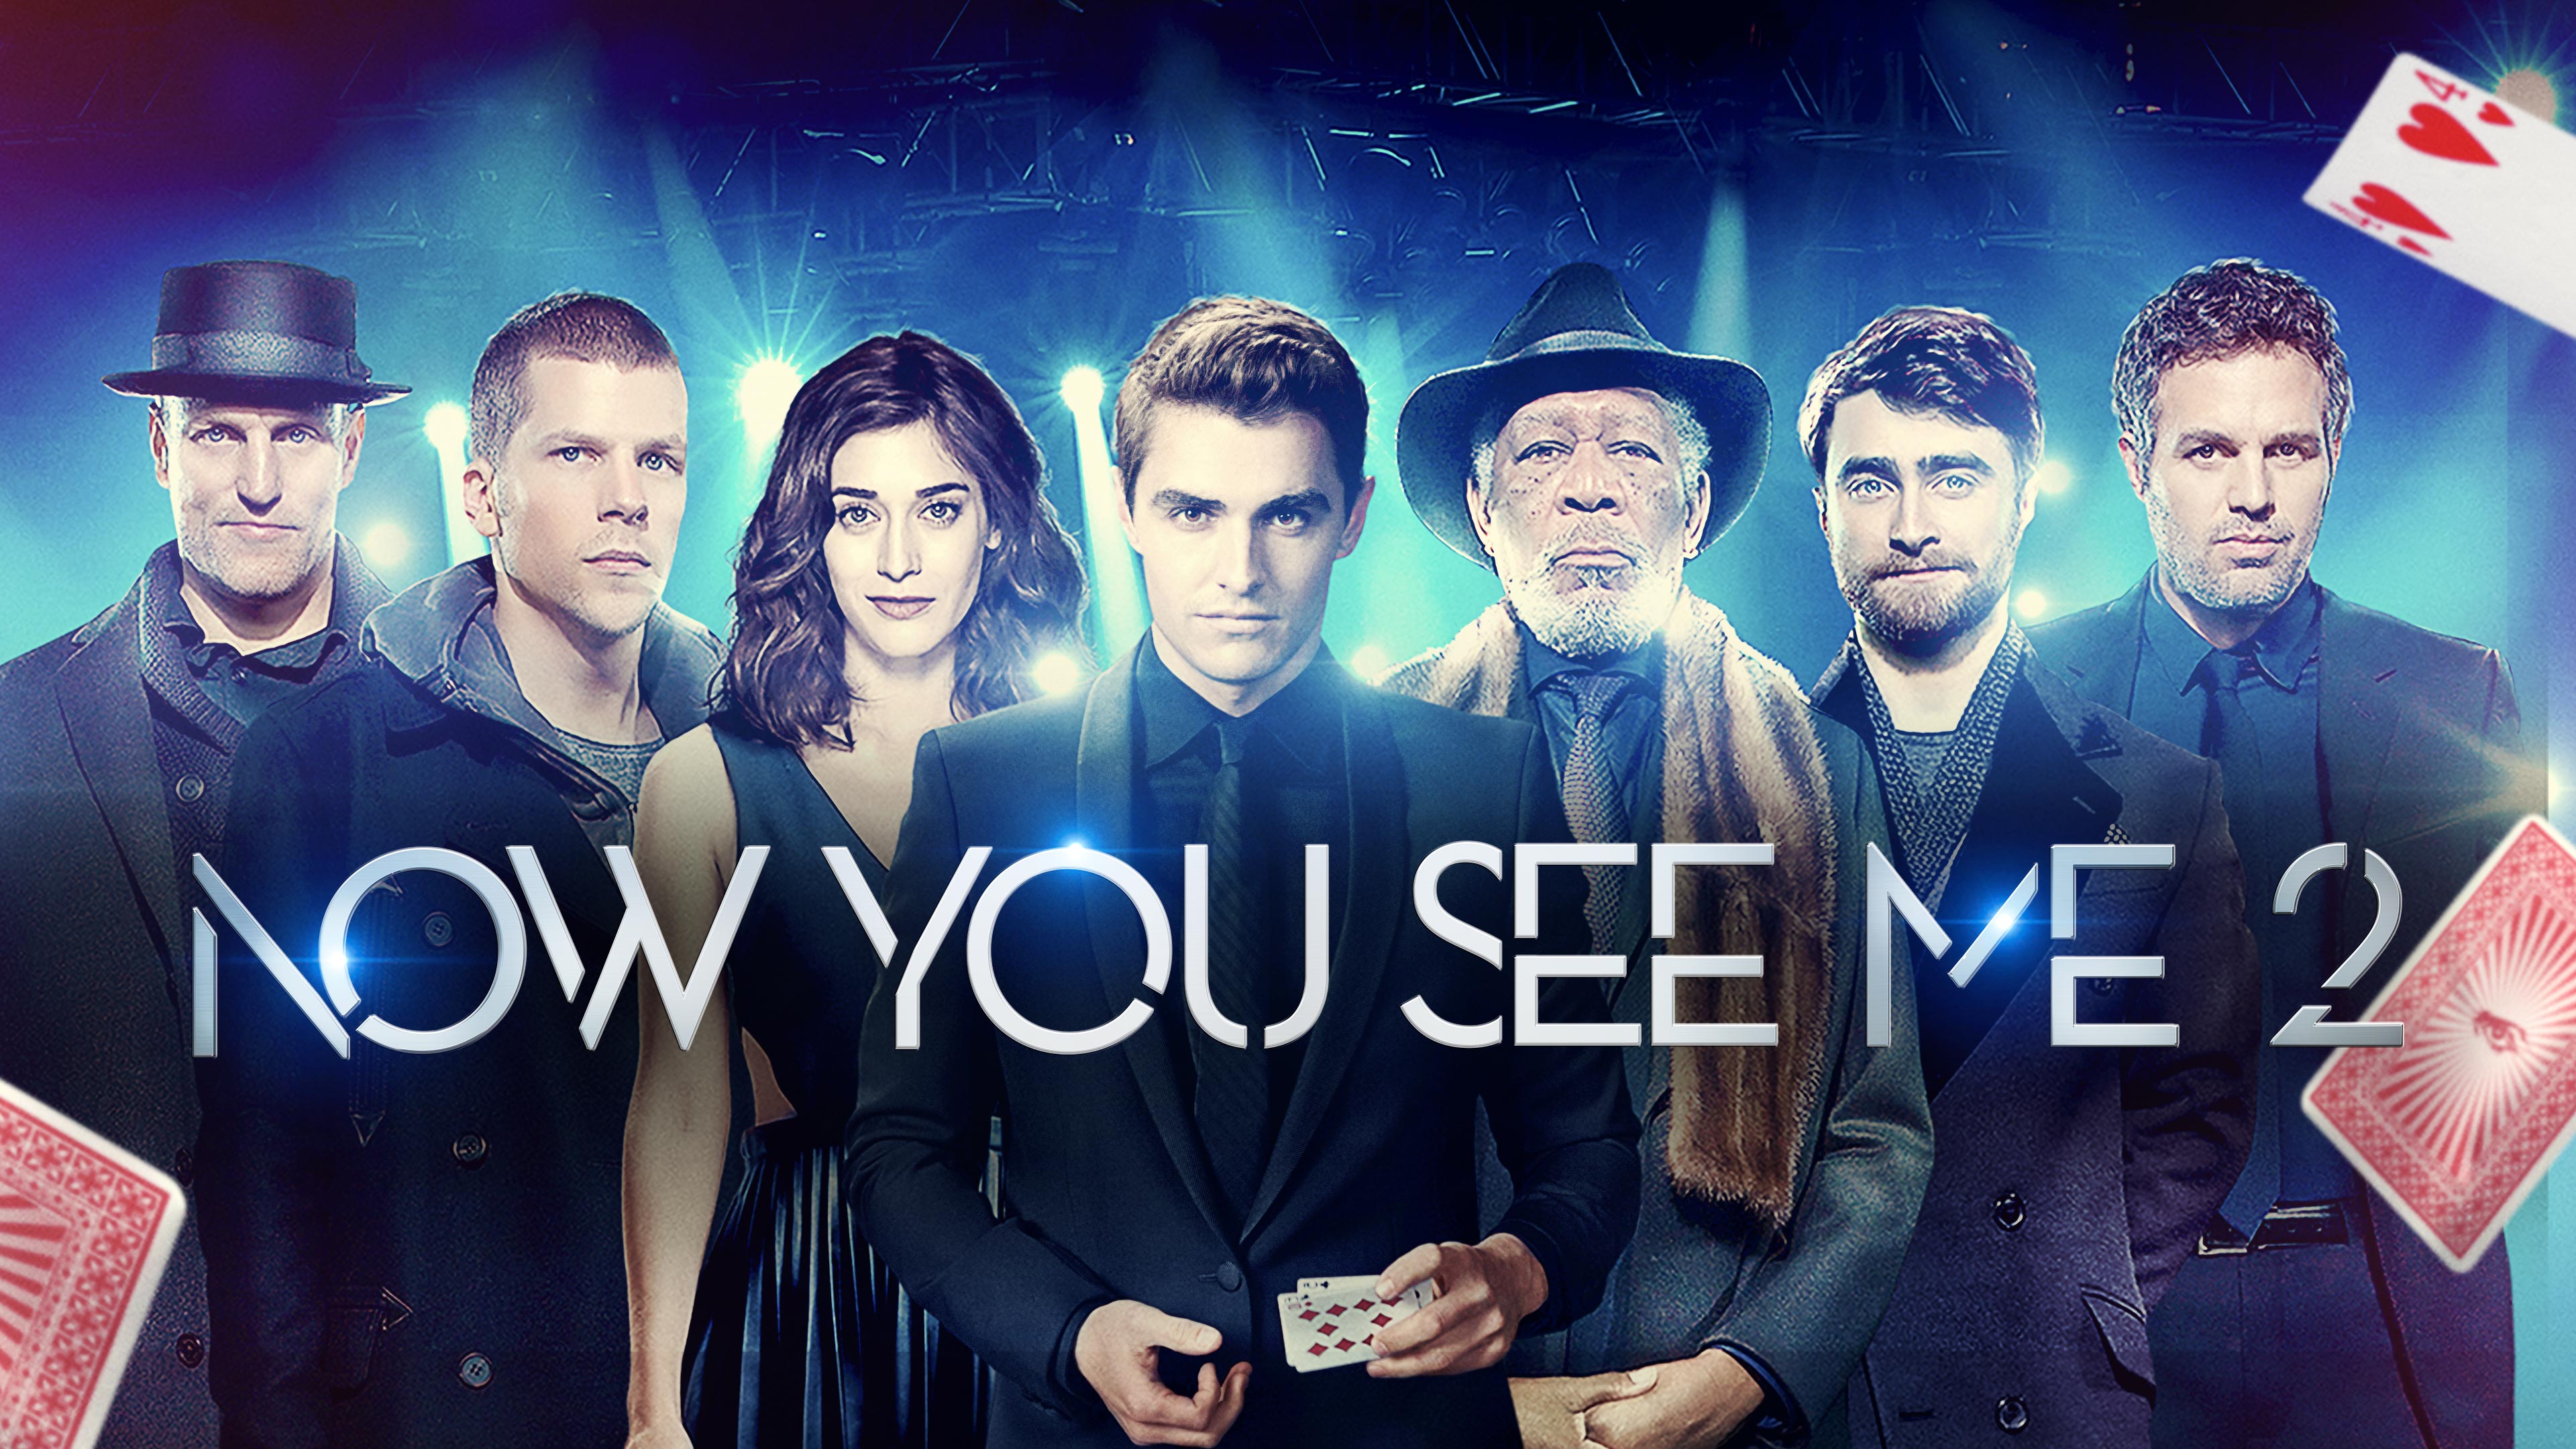 Watch Now You See Me 2 Online | Stream Full Movies